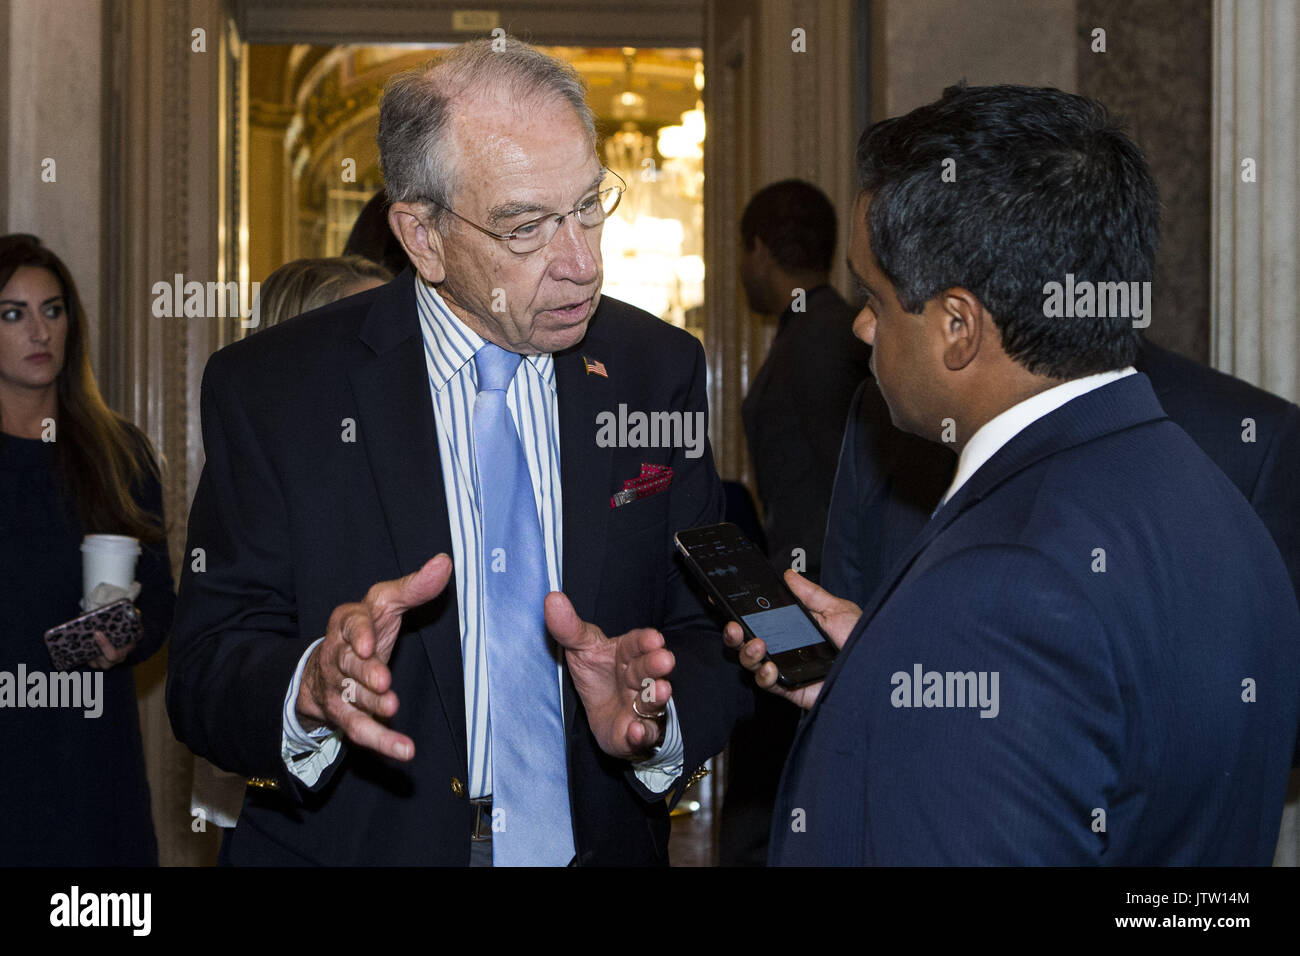 Washington, District Of Columbia, USA. 26th July, 2017. Sen. CHUCK GRASSLEY (R-IA) speaks to a reporter prior to a vote on the Senate floor on Capitol Hill. Credit: Alex Edelman/ZUMA Wire/Alamy Live News Stock Photo